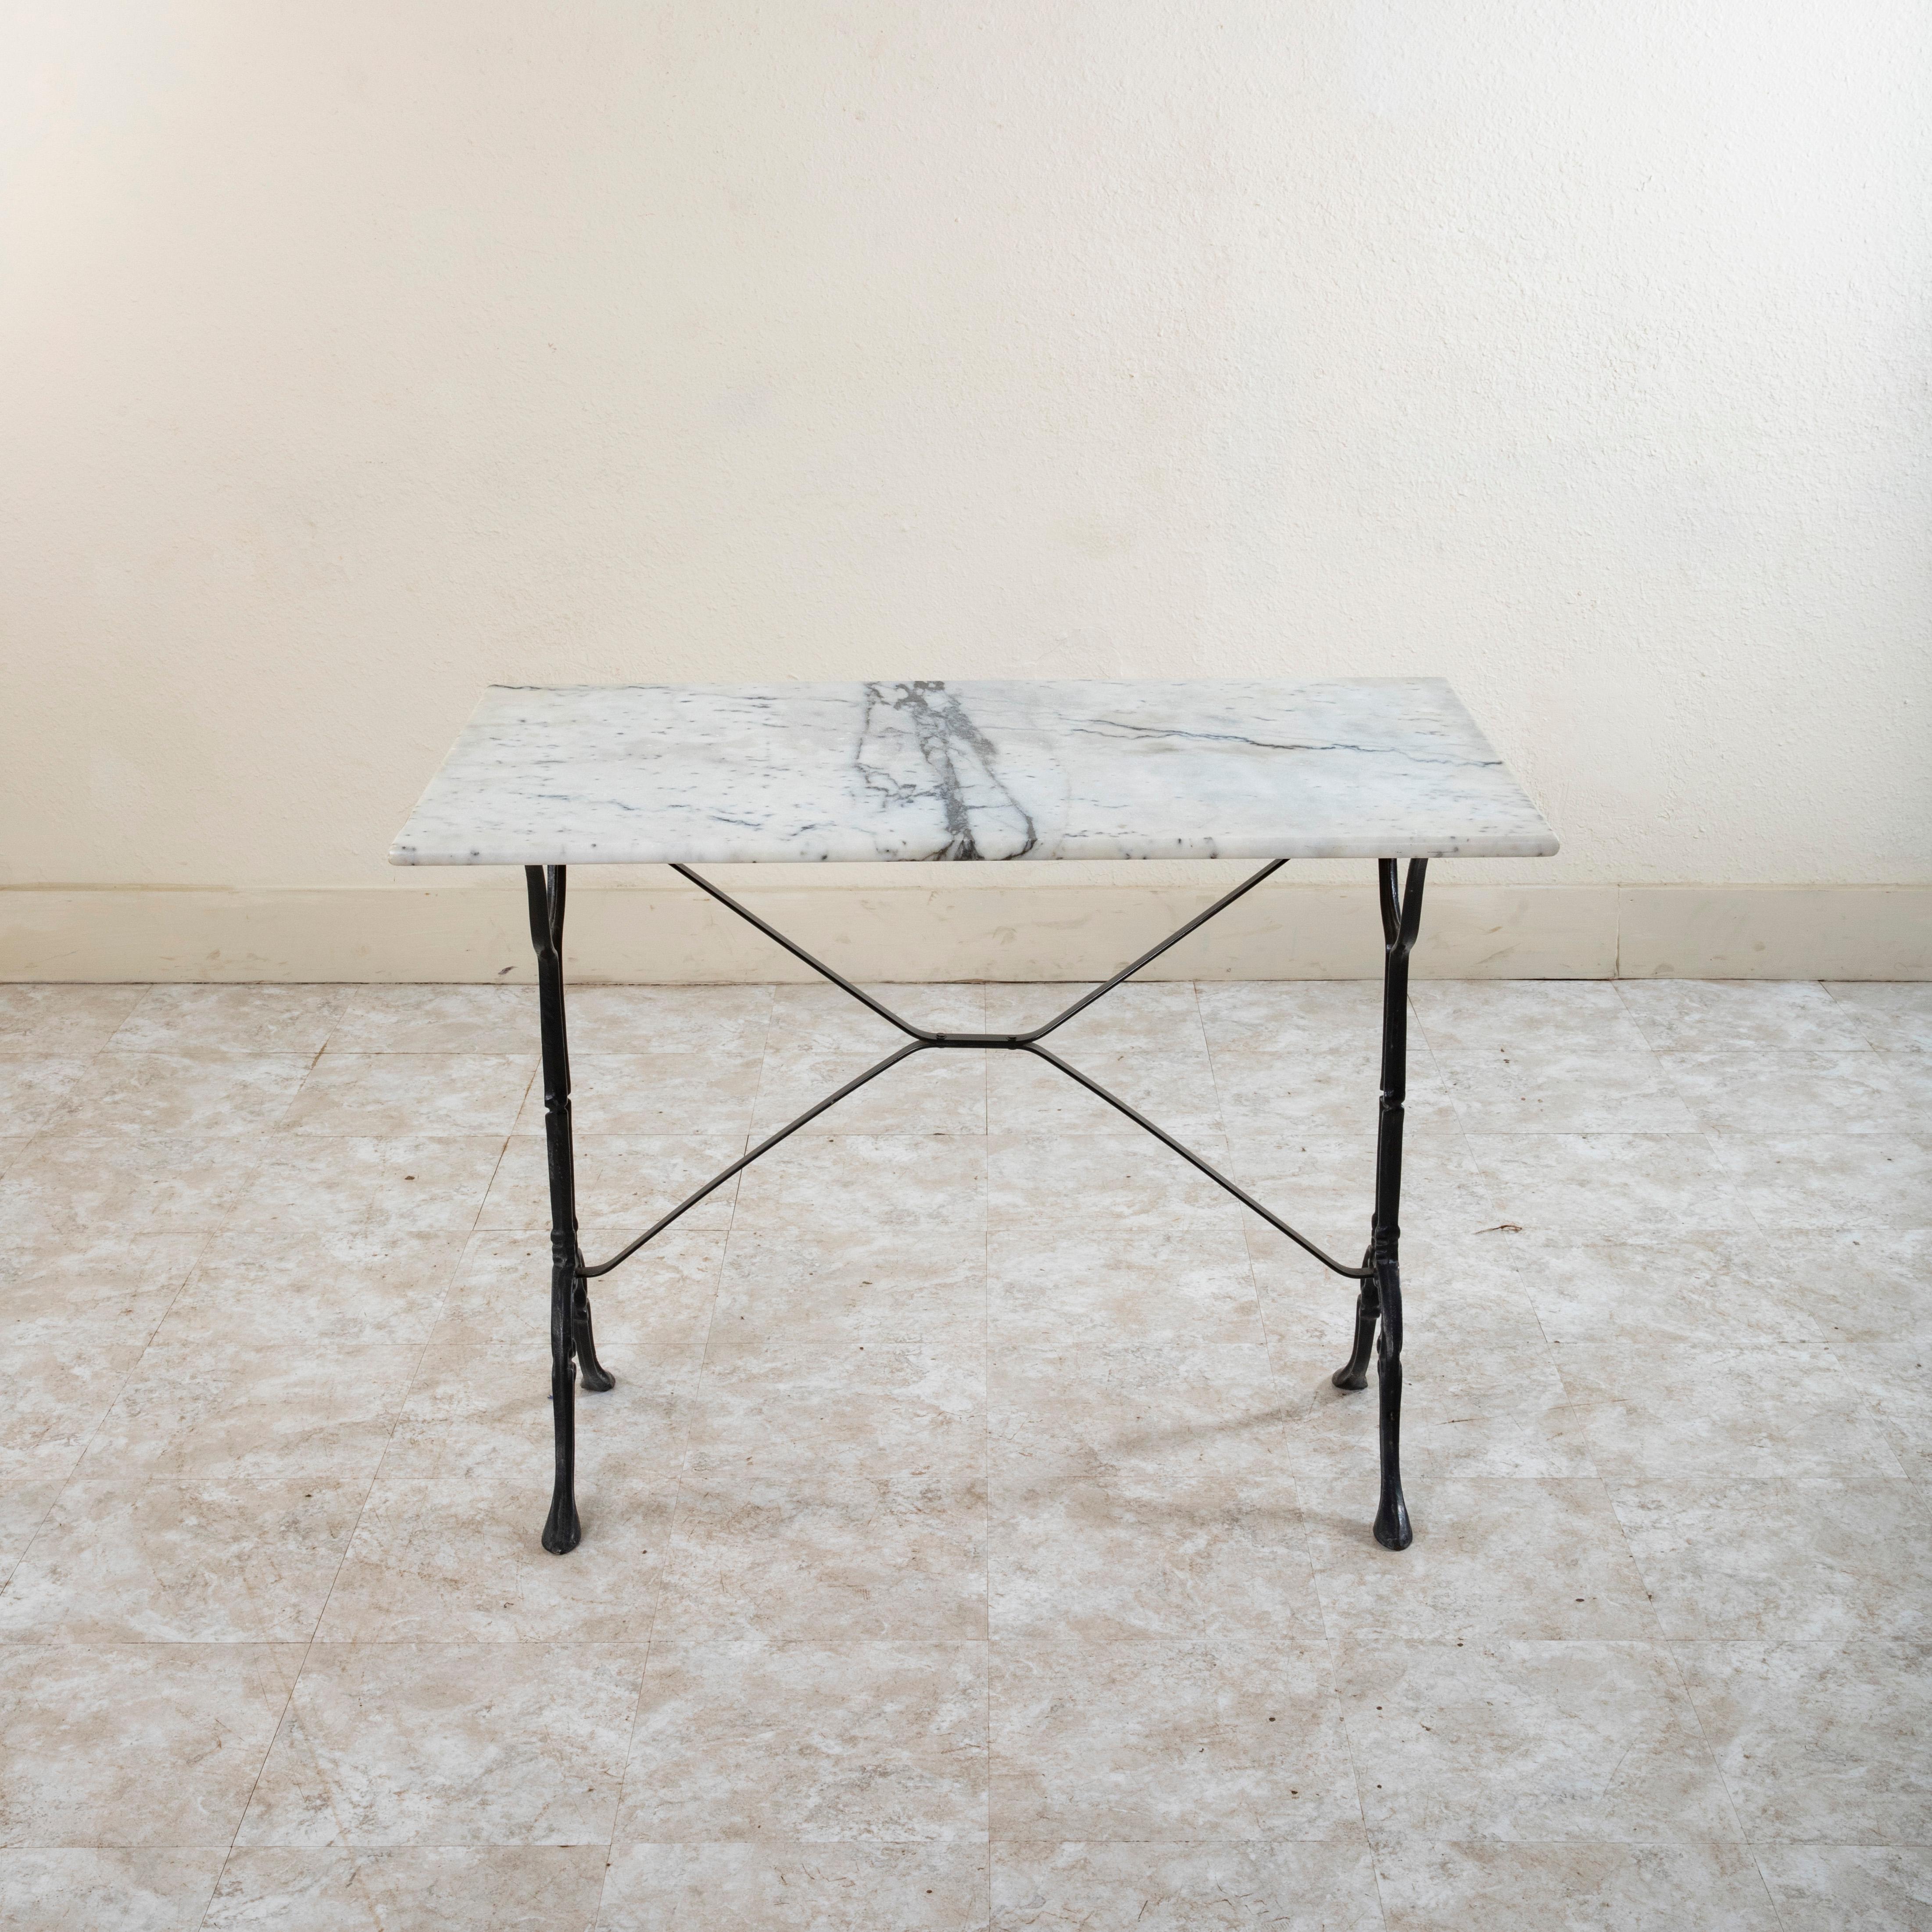 Originally used in a French brasserie during the mid-twentieth century, this cast iron bistro table or cafe table features a solid white marble top with grey veining. Scrolled iron legs support the top and are joined by an X-stretcher that provides